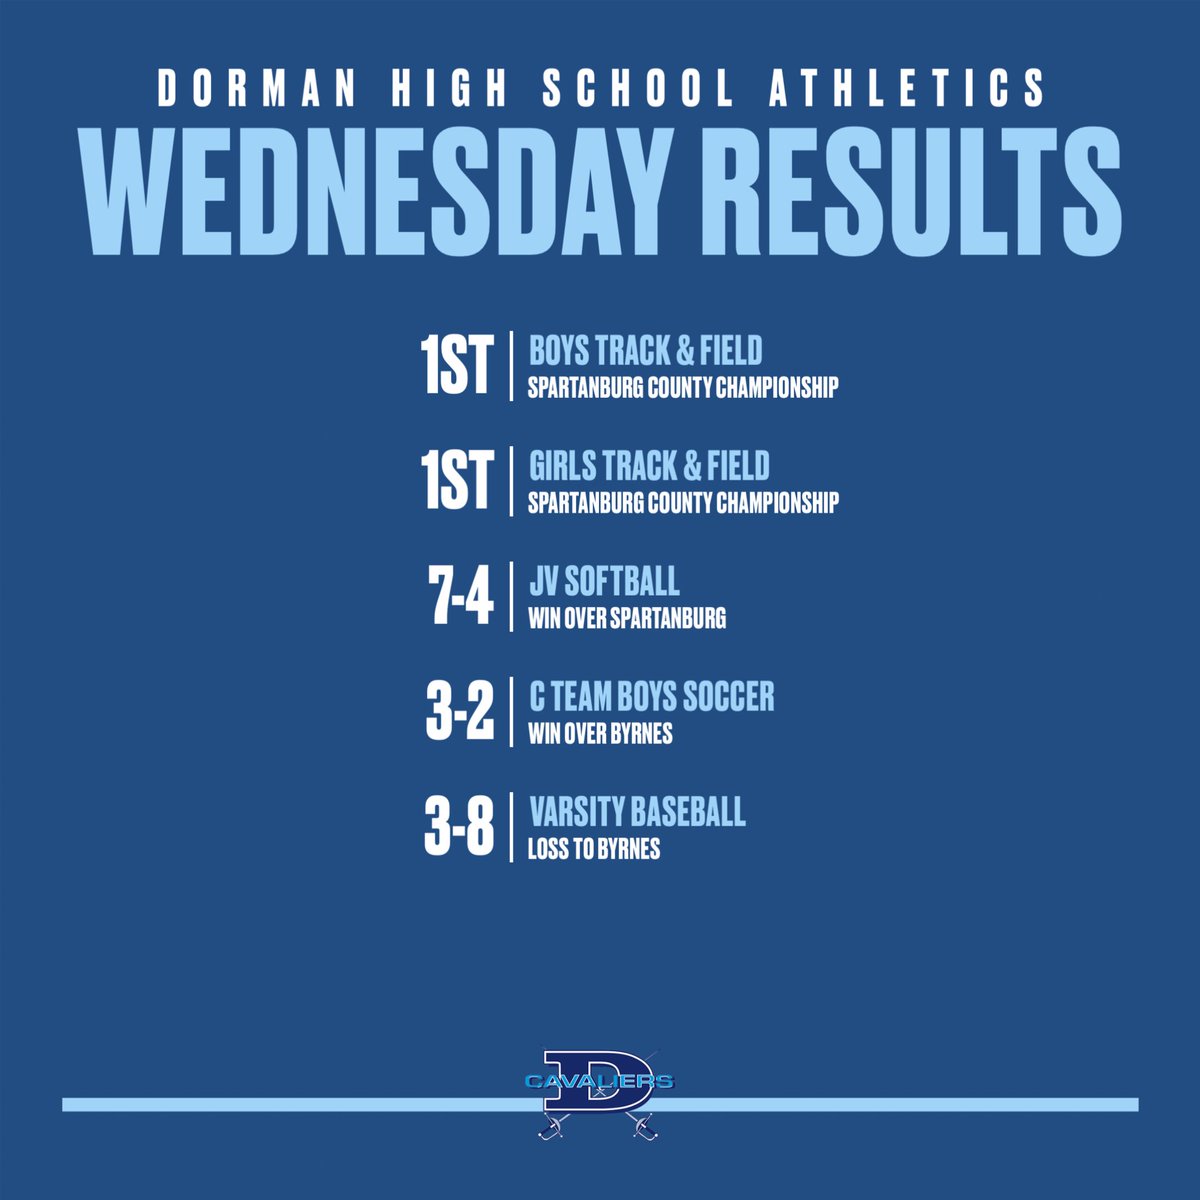 ⚔️ Results from 4/24 Congratulations to our Girls & Boys Track & Field teams on winning the Spartanburg County Championship! 🥇